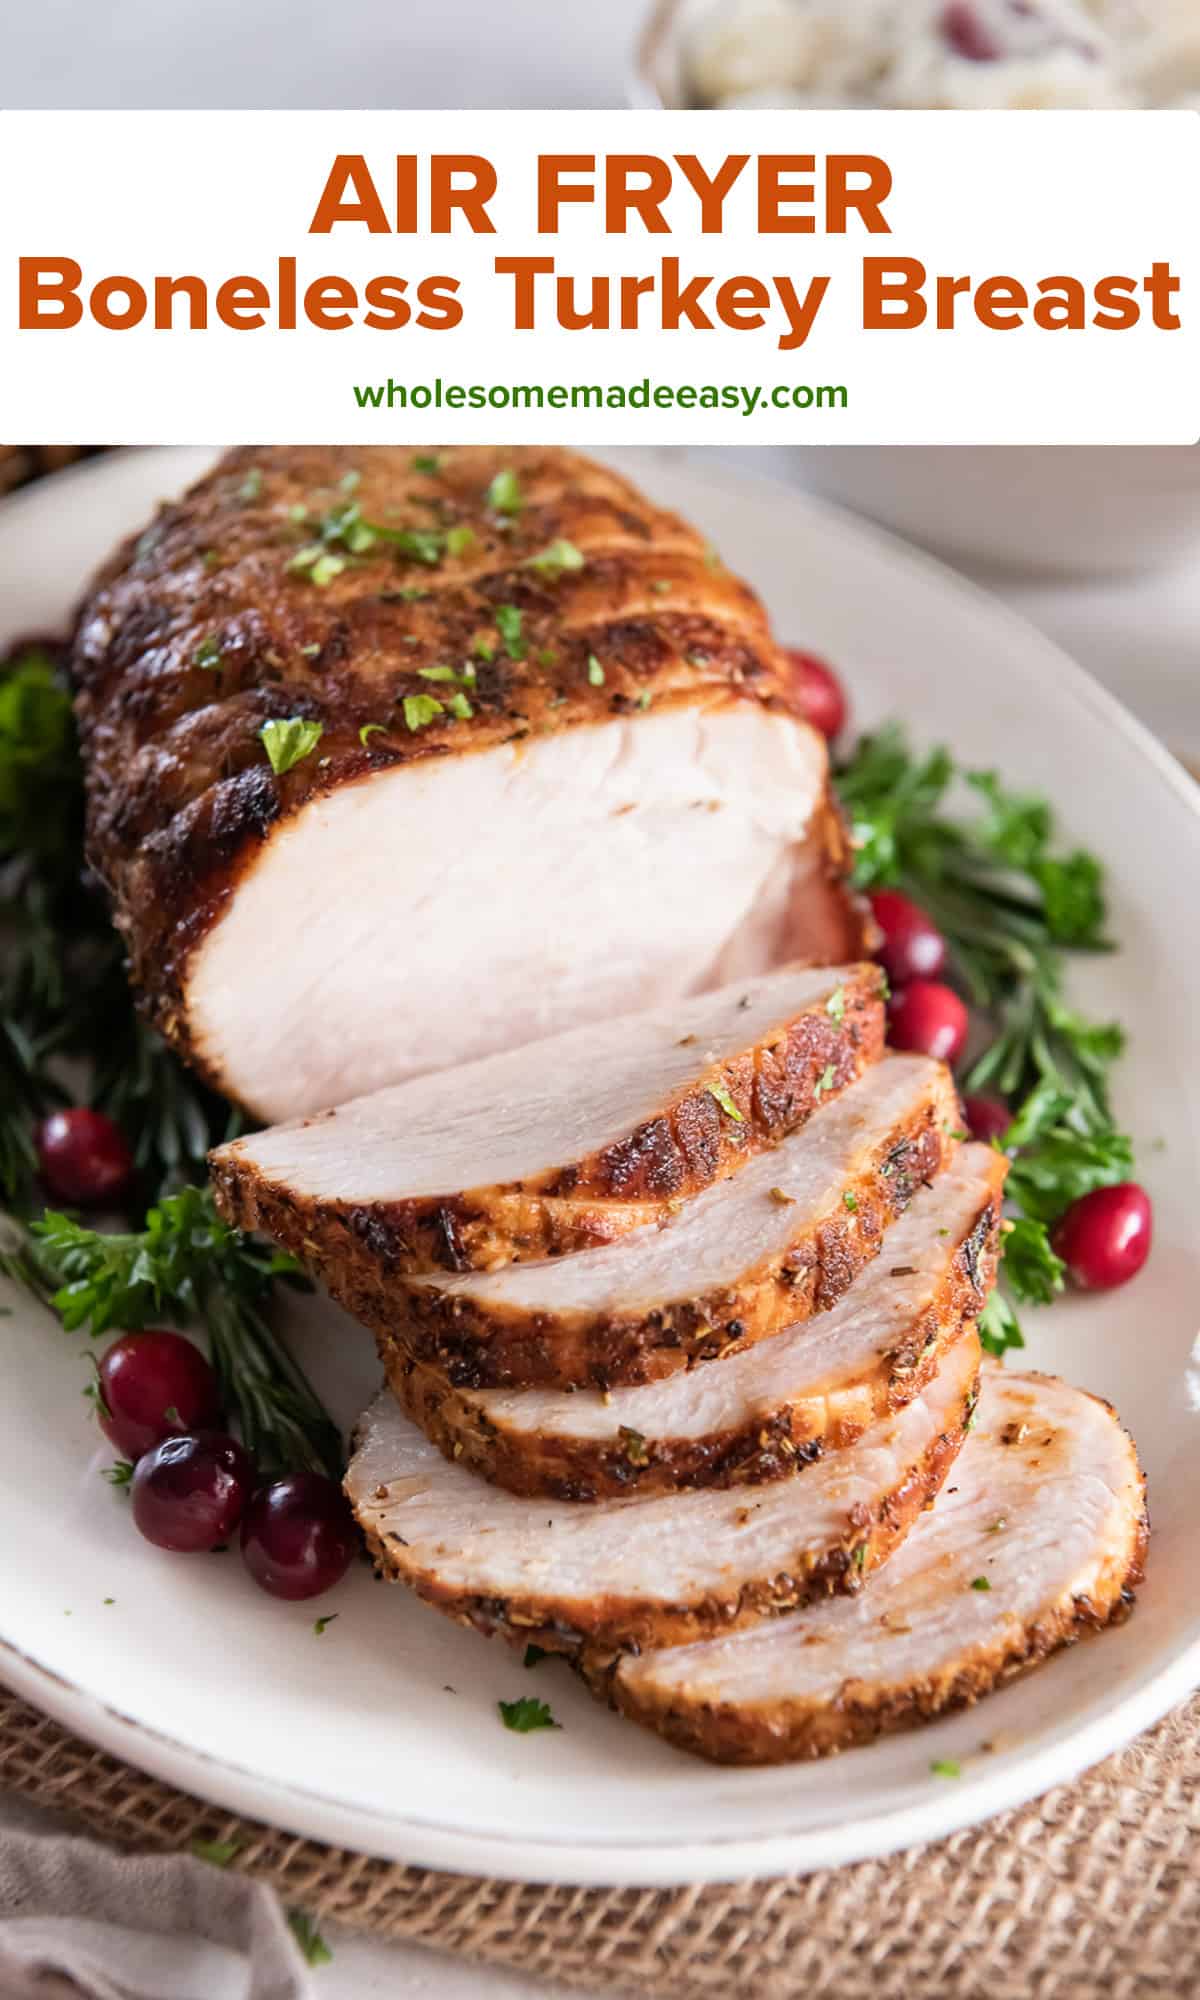 A sliced boneless turkey breast a white platter decorated with fresh herbs and cranberries with text.